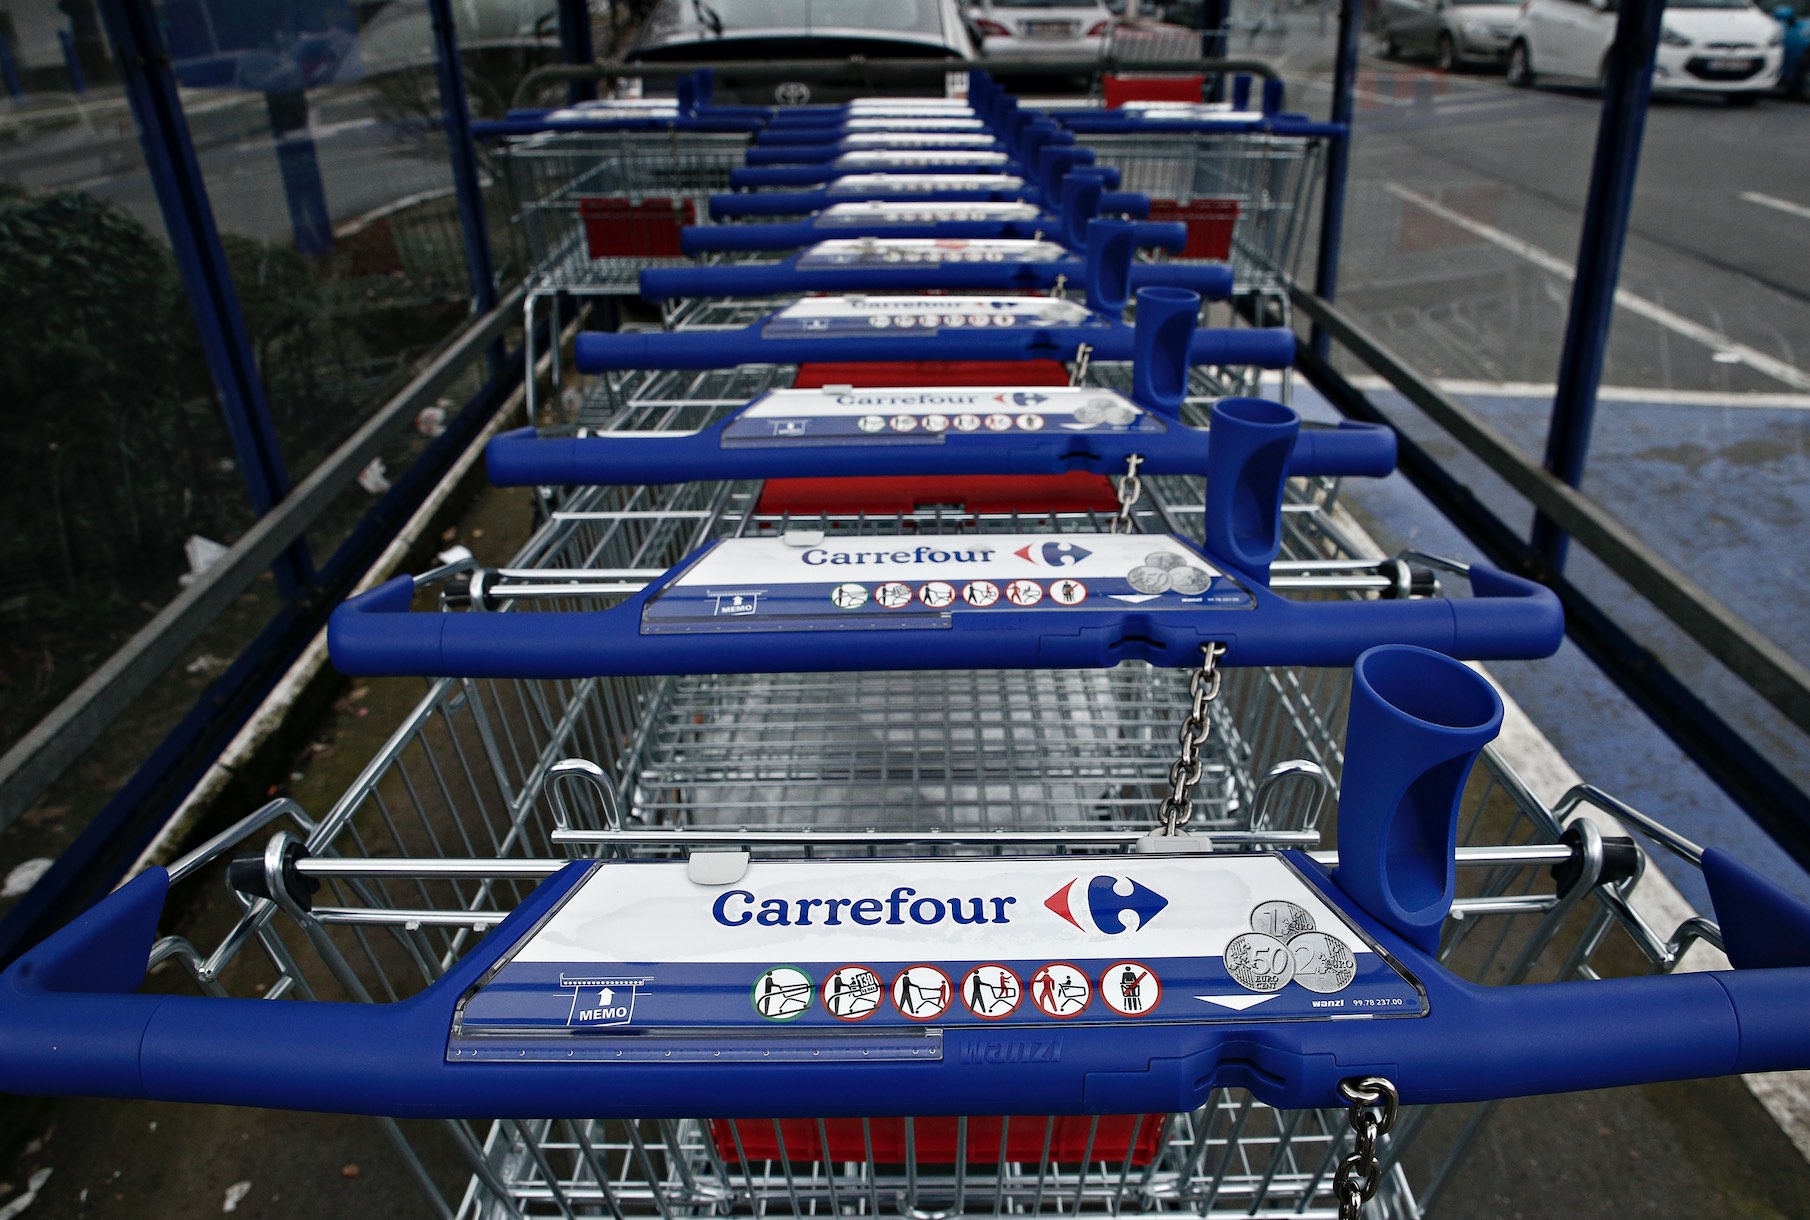 Carrefour Couche-Tard